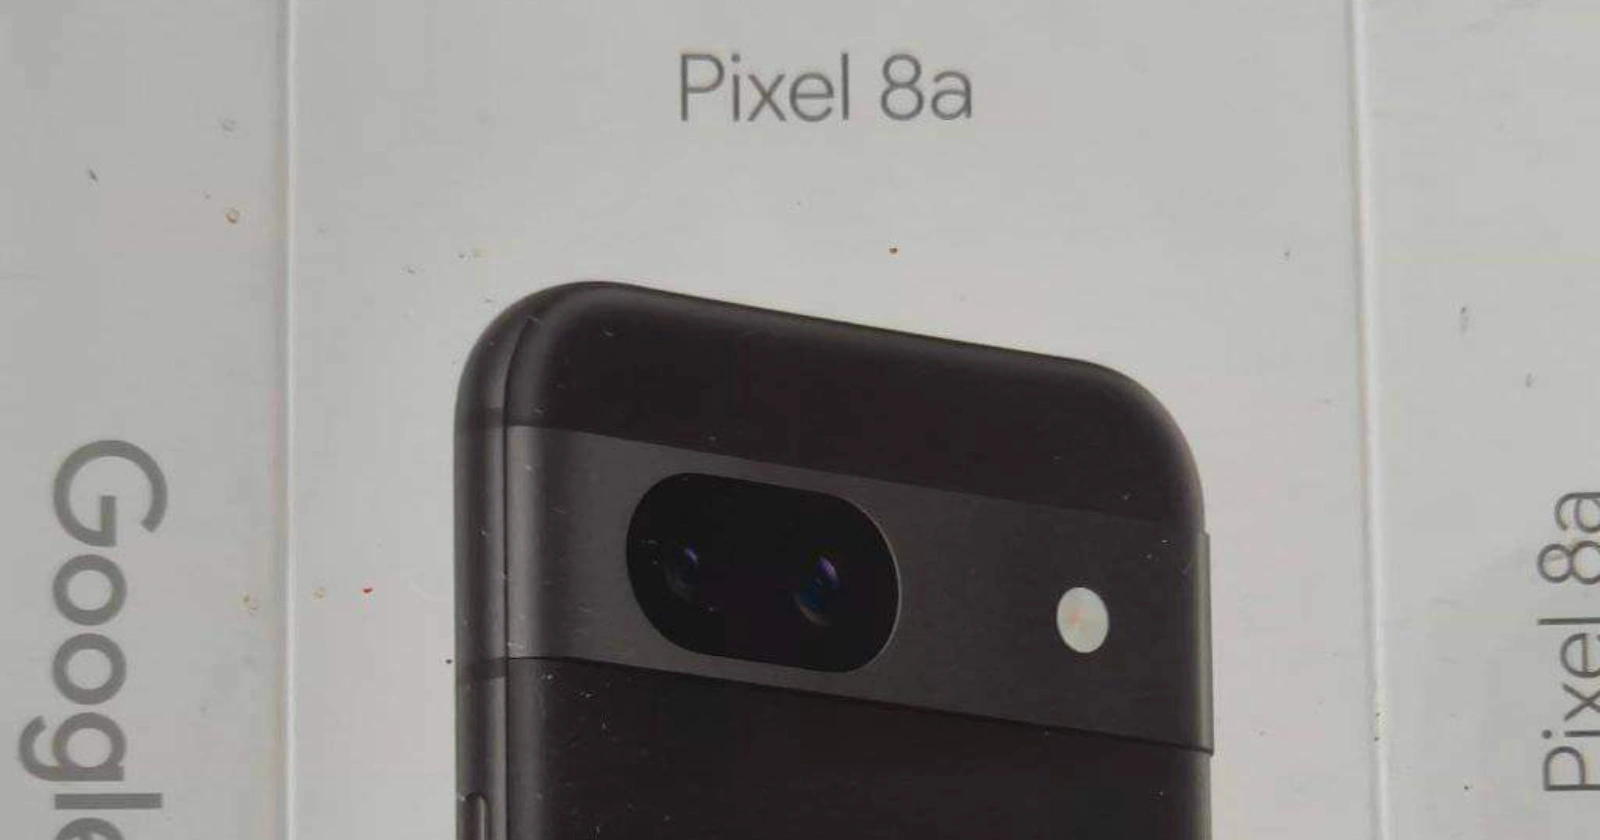 Google Pixel 8a has been submitted for the United States FCC approval